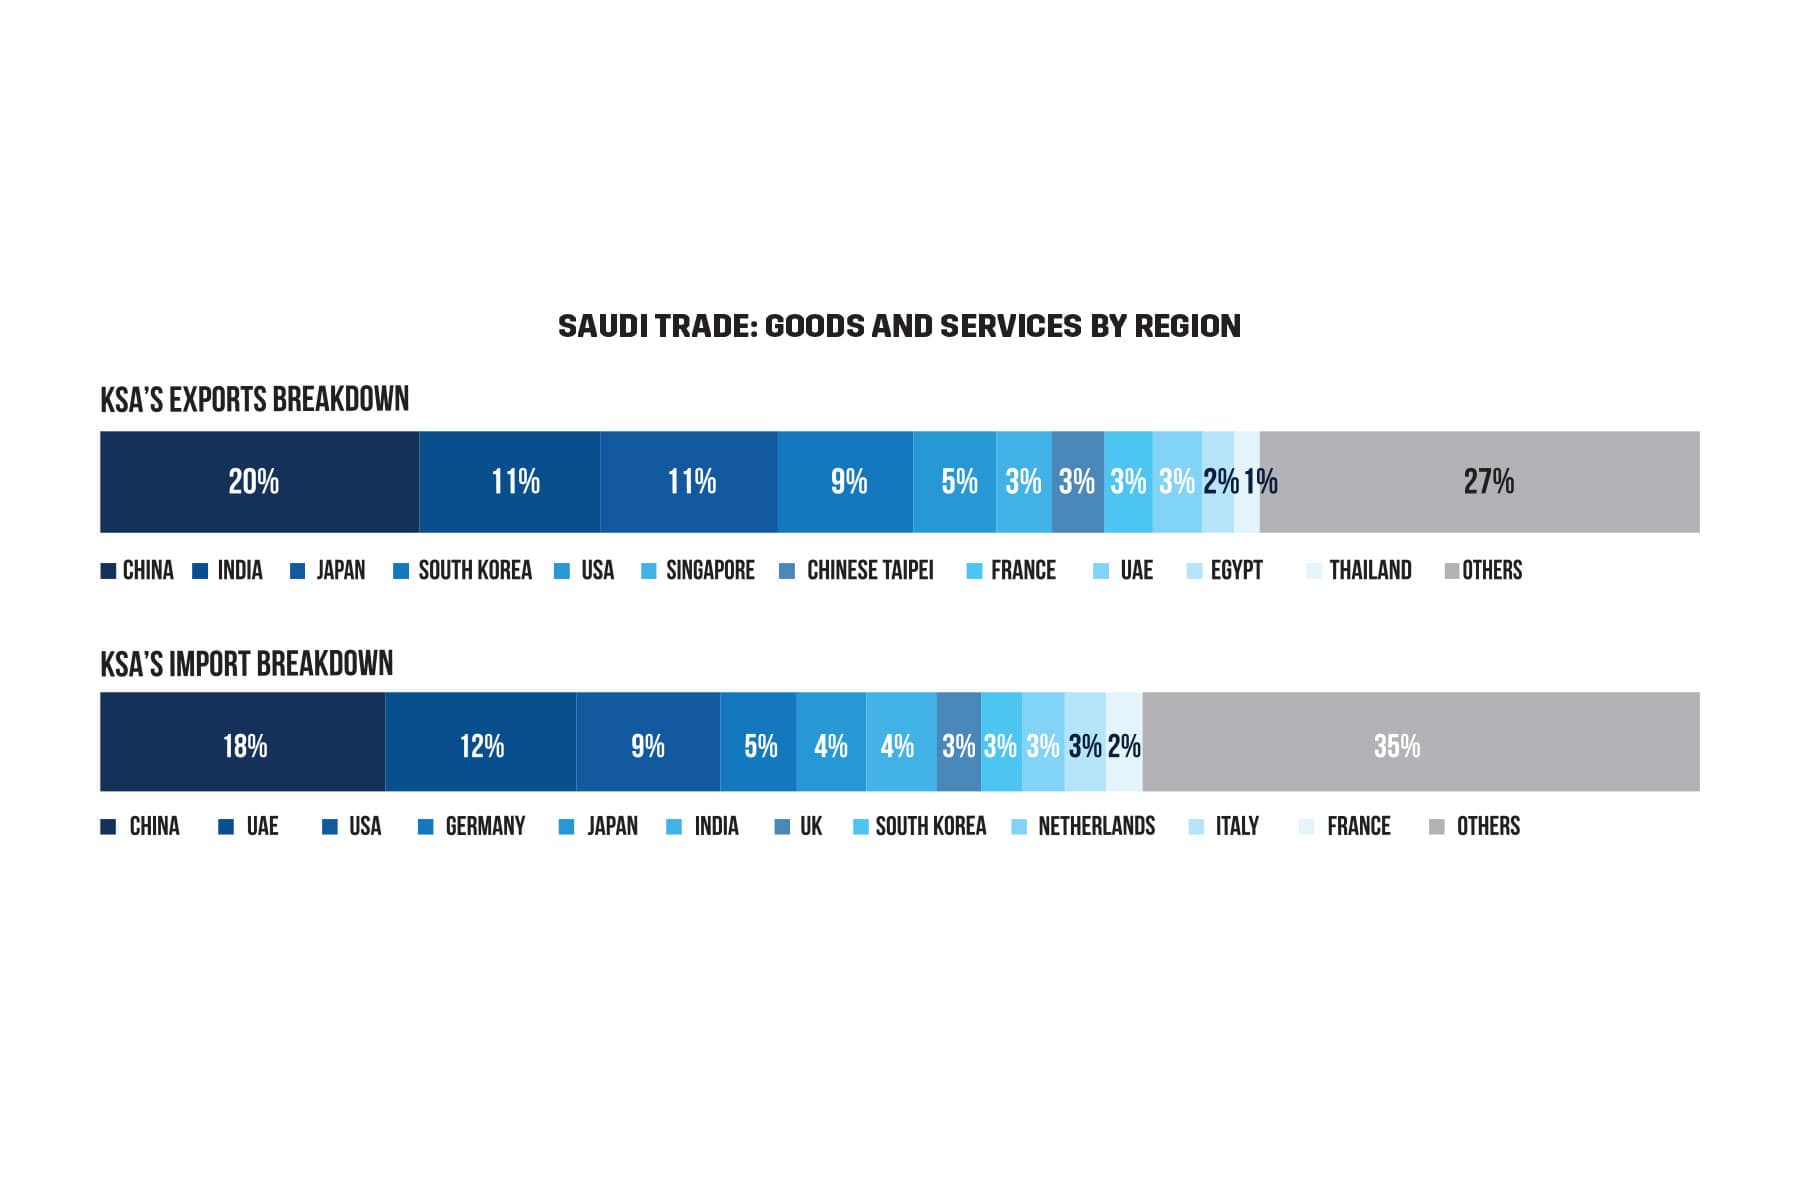 Saudi trade: Goods and Services by Region